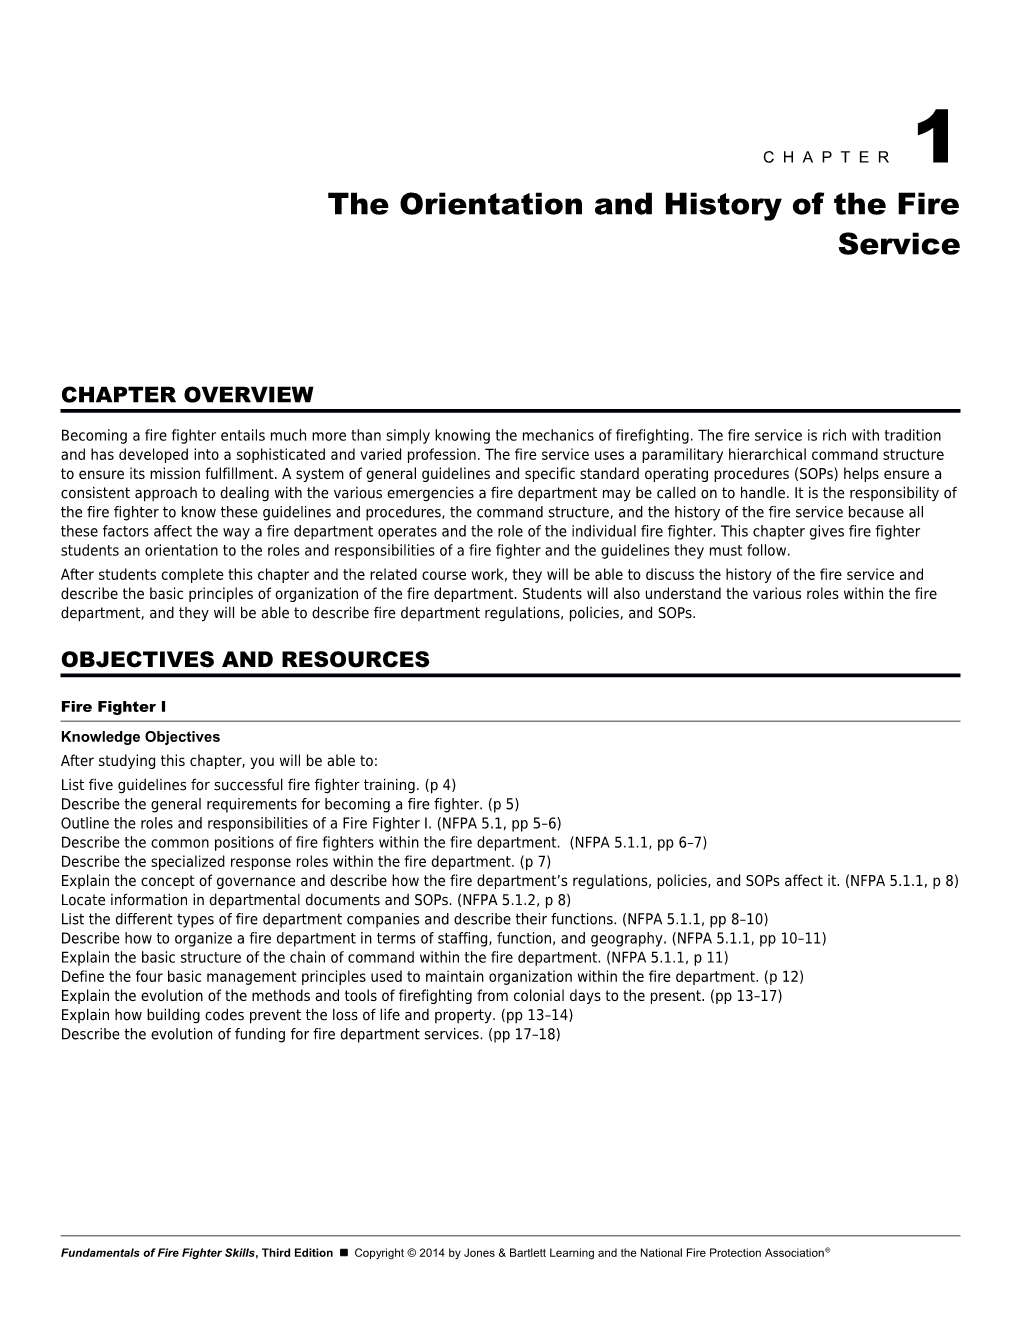 The Orientation and History of the Fire Service